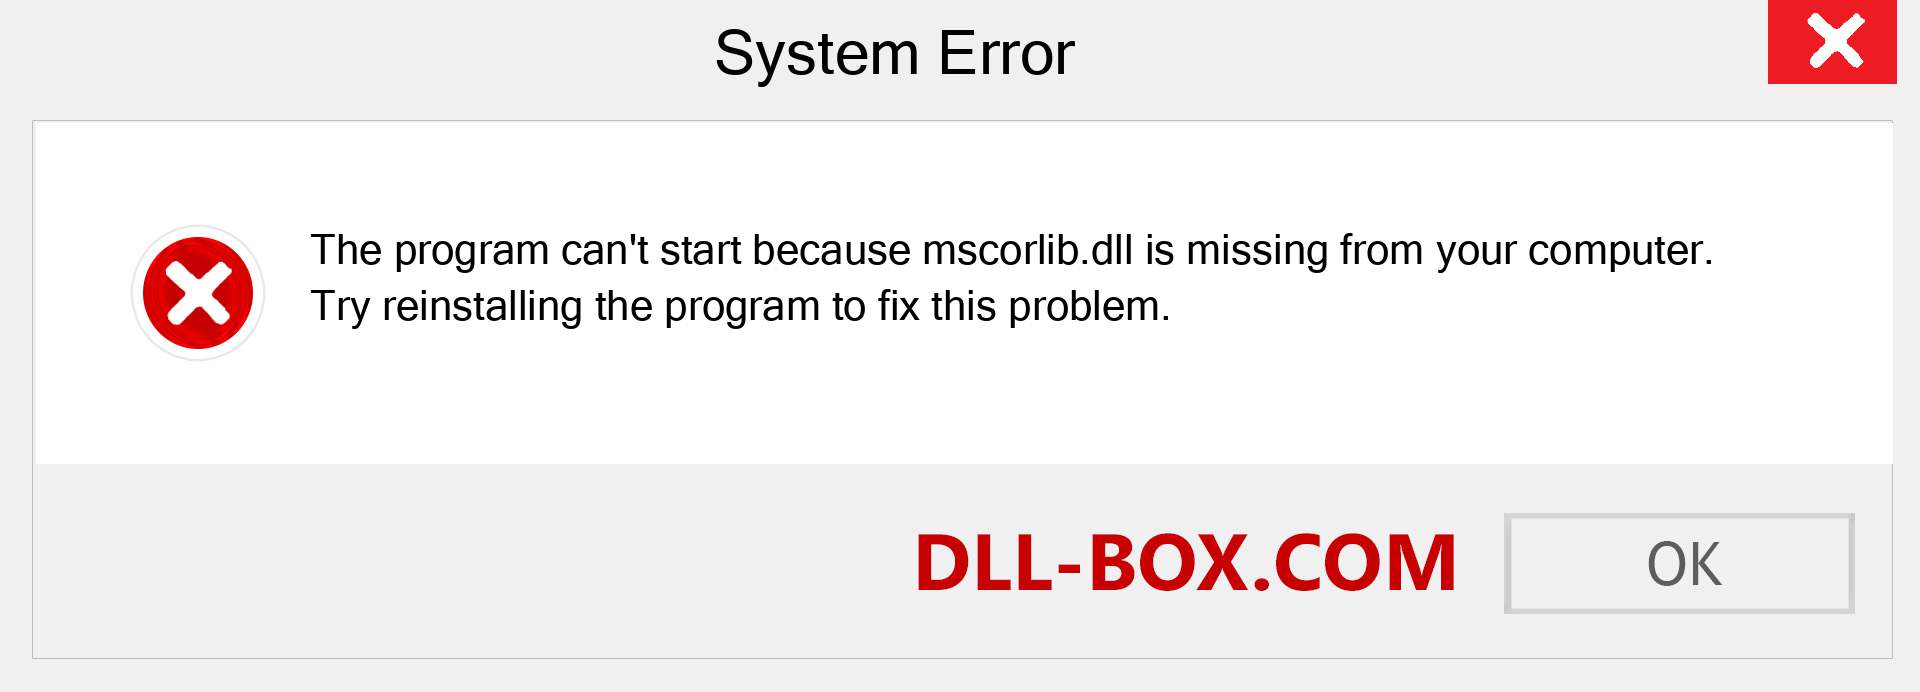  mscorlib.dll file is missing?. Download for Windows 7, 8, 10 - Fix  mscorlib dll Missing Error on Windows, photos, images